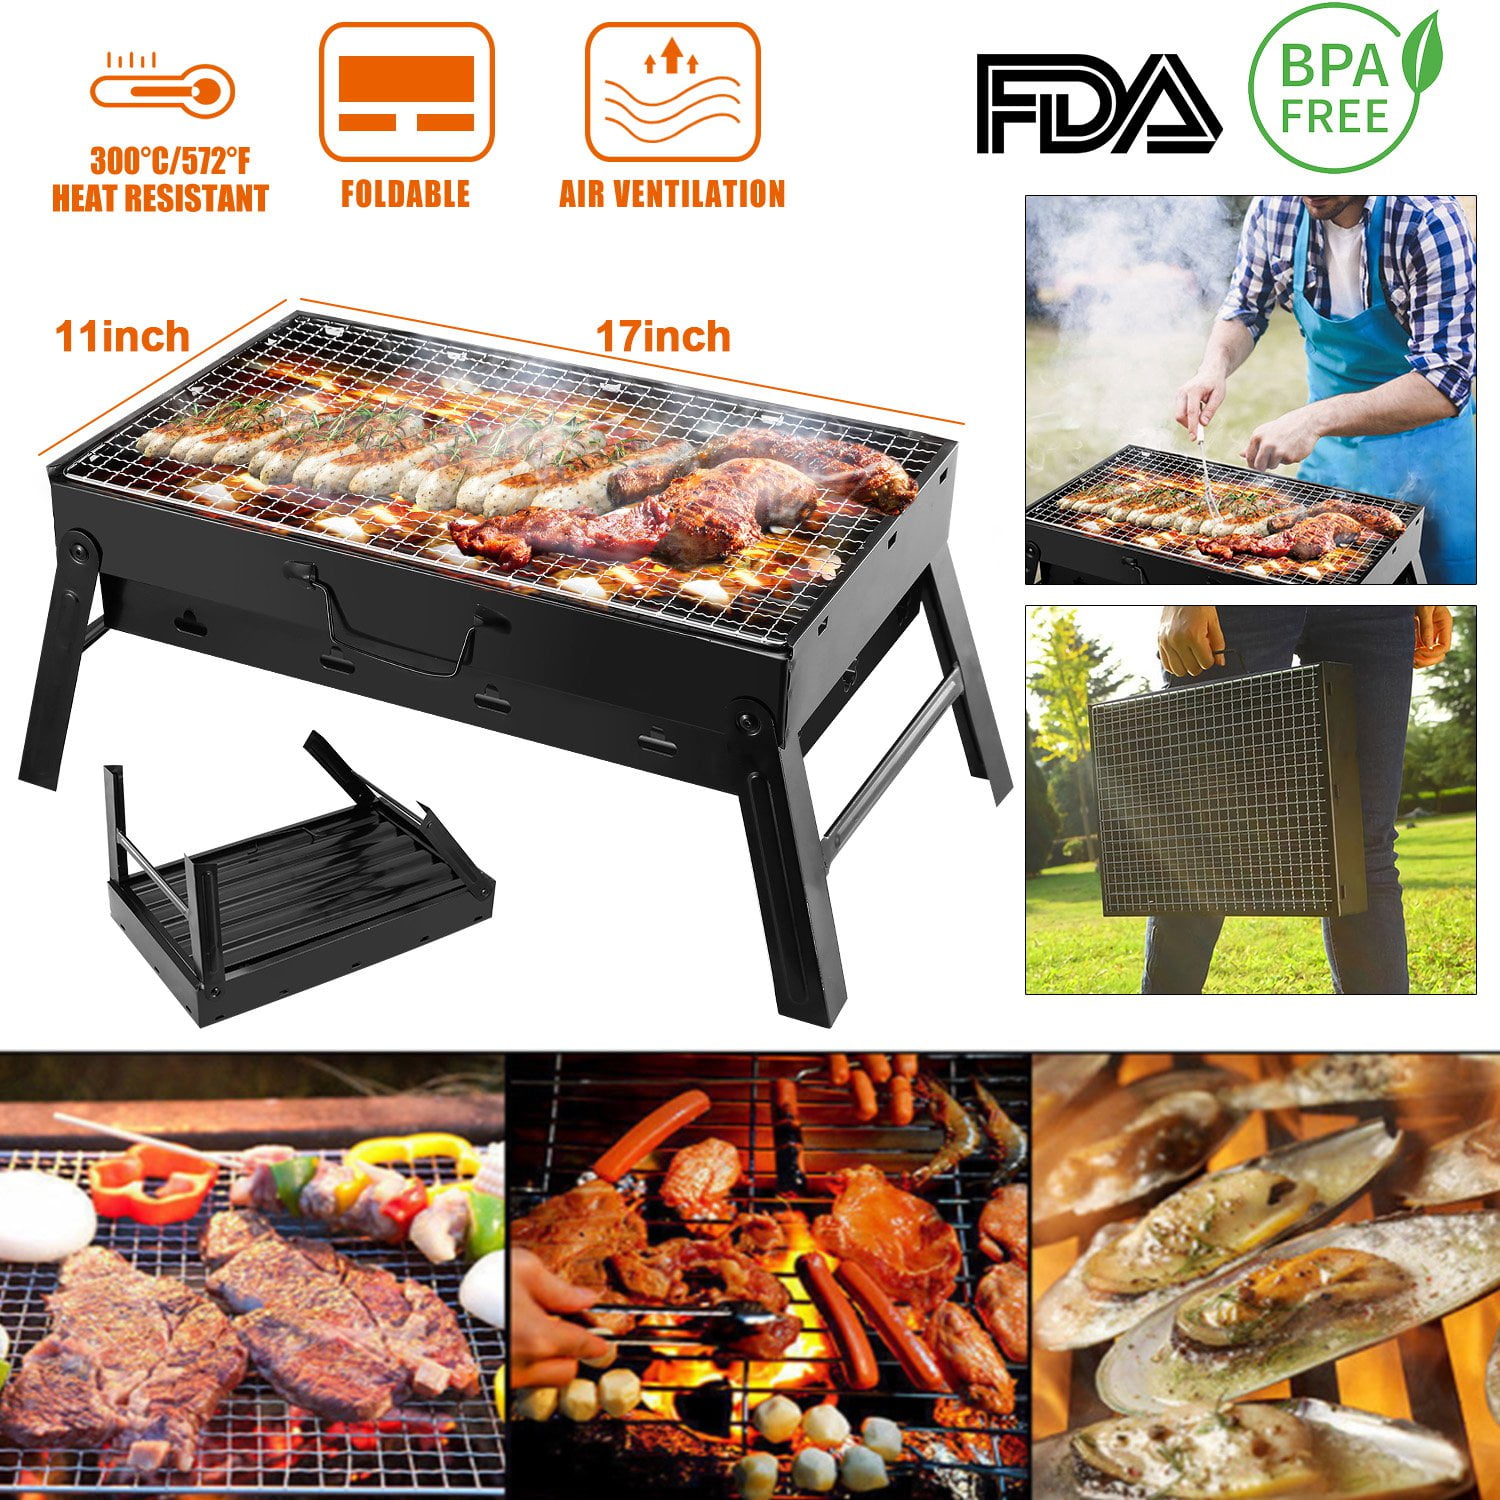 iMounTEK Portable BBQ Barbecue Grill Foldable Charcoal Grill 